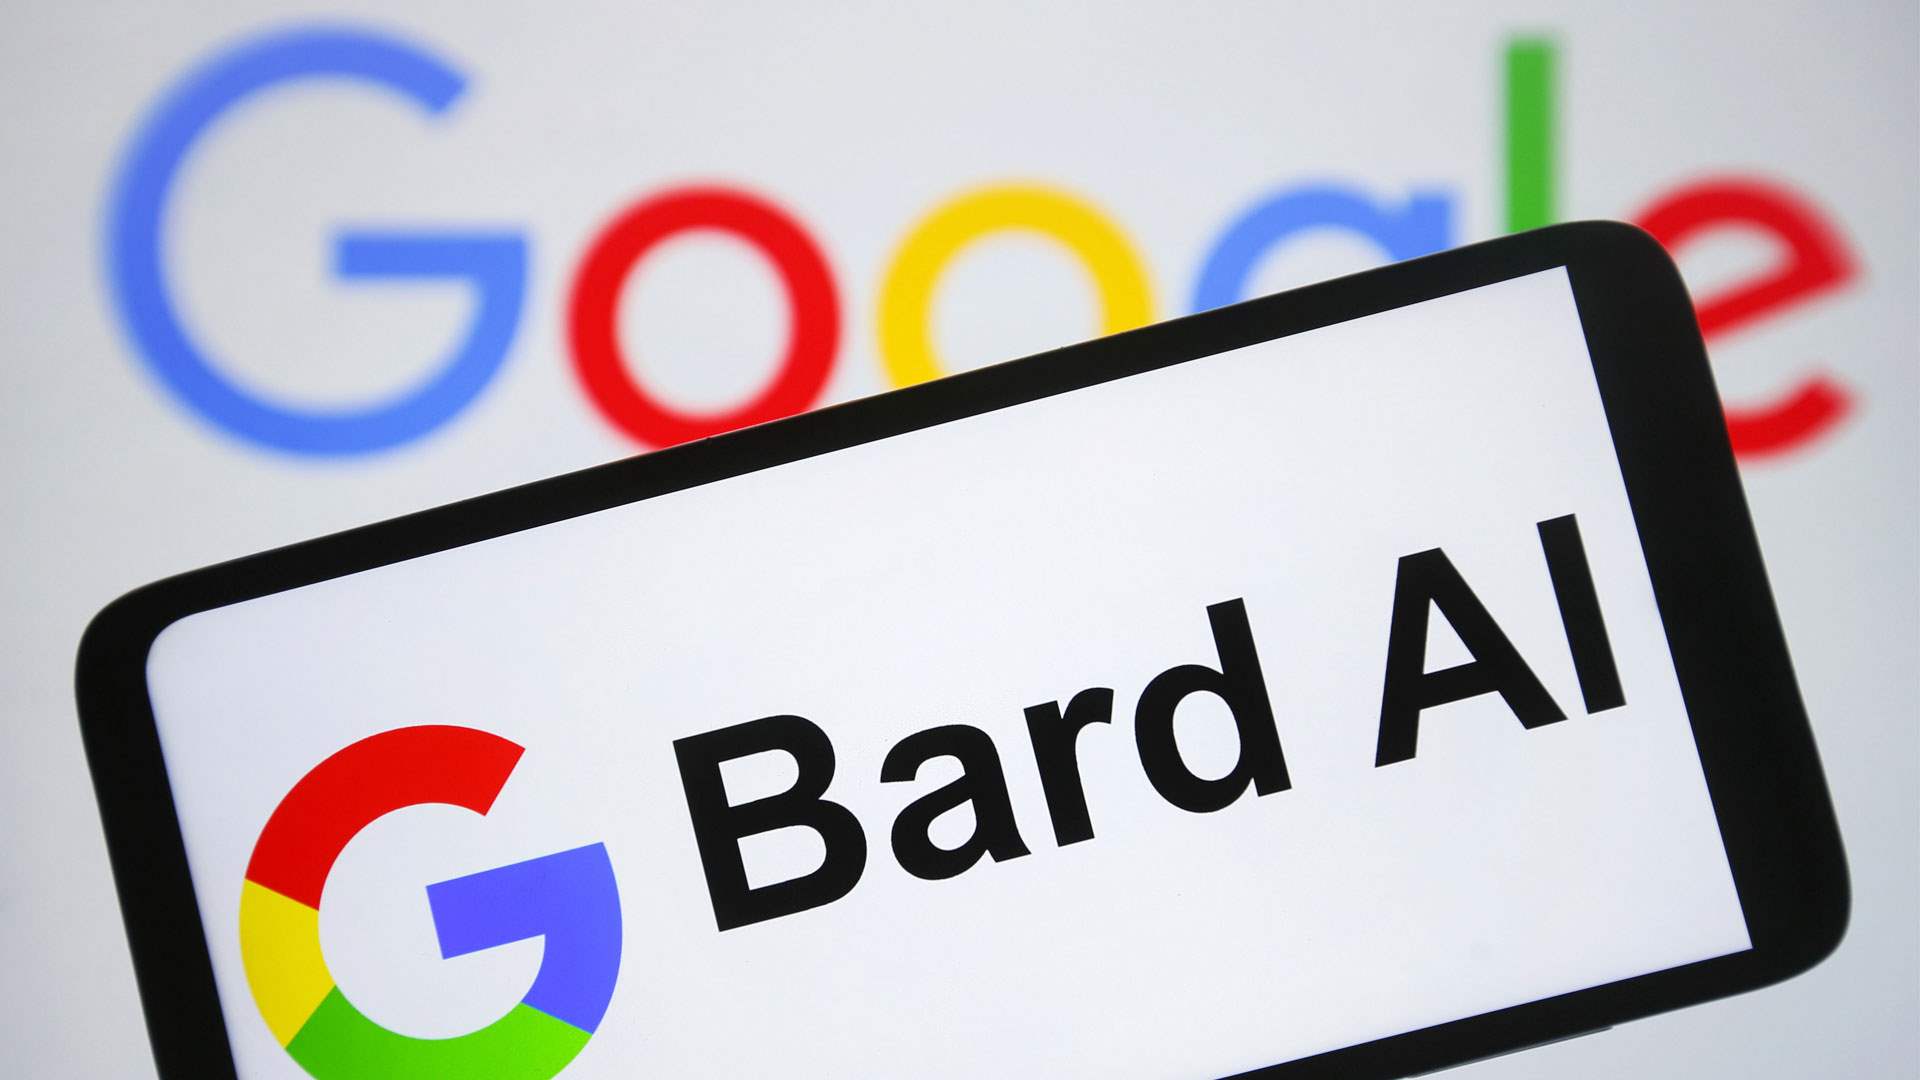 New Update: Google’s Bard Chatbot Integrates With Google Apps And Doubles-Checks Answers